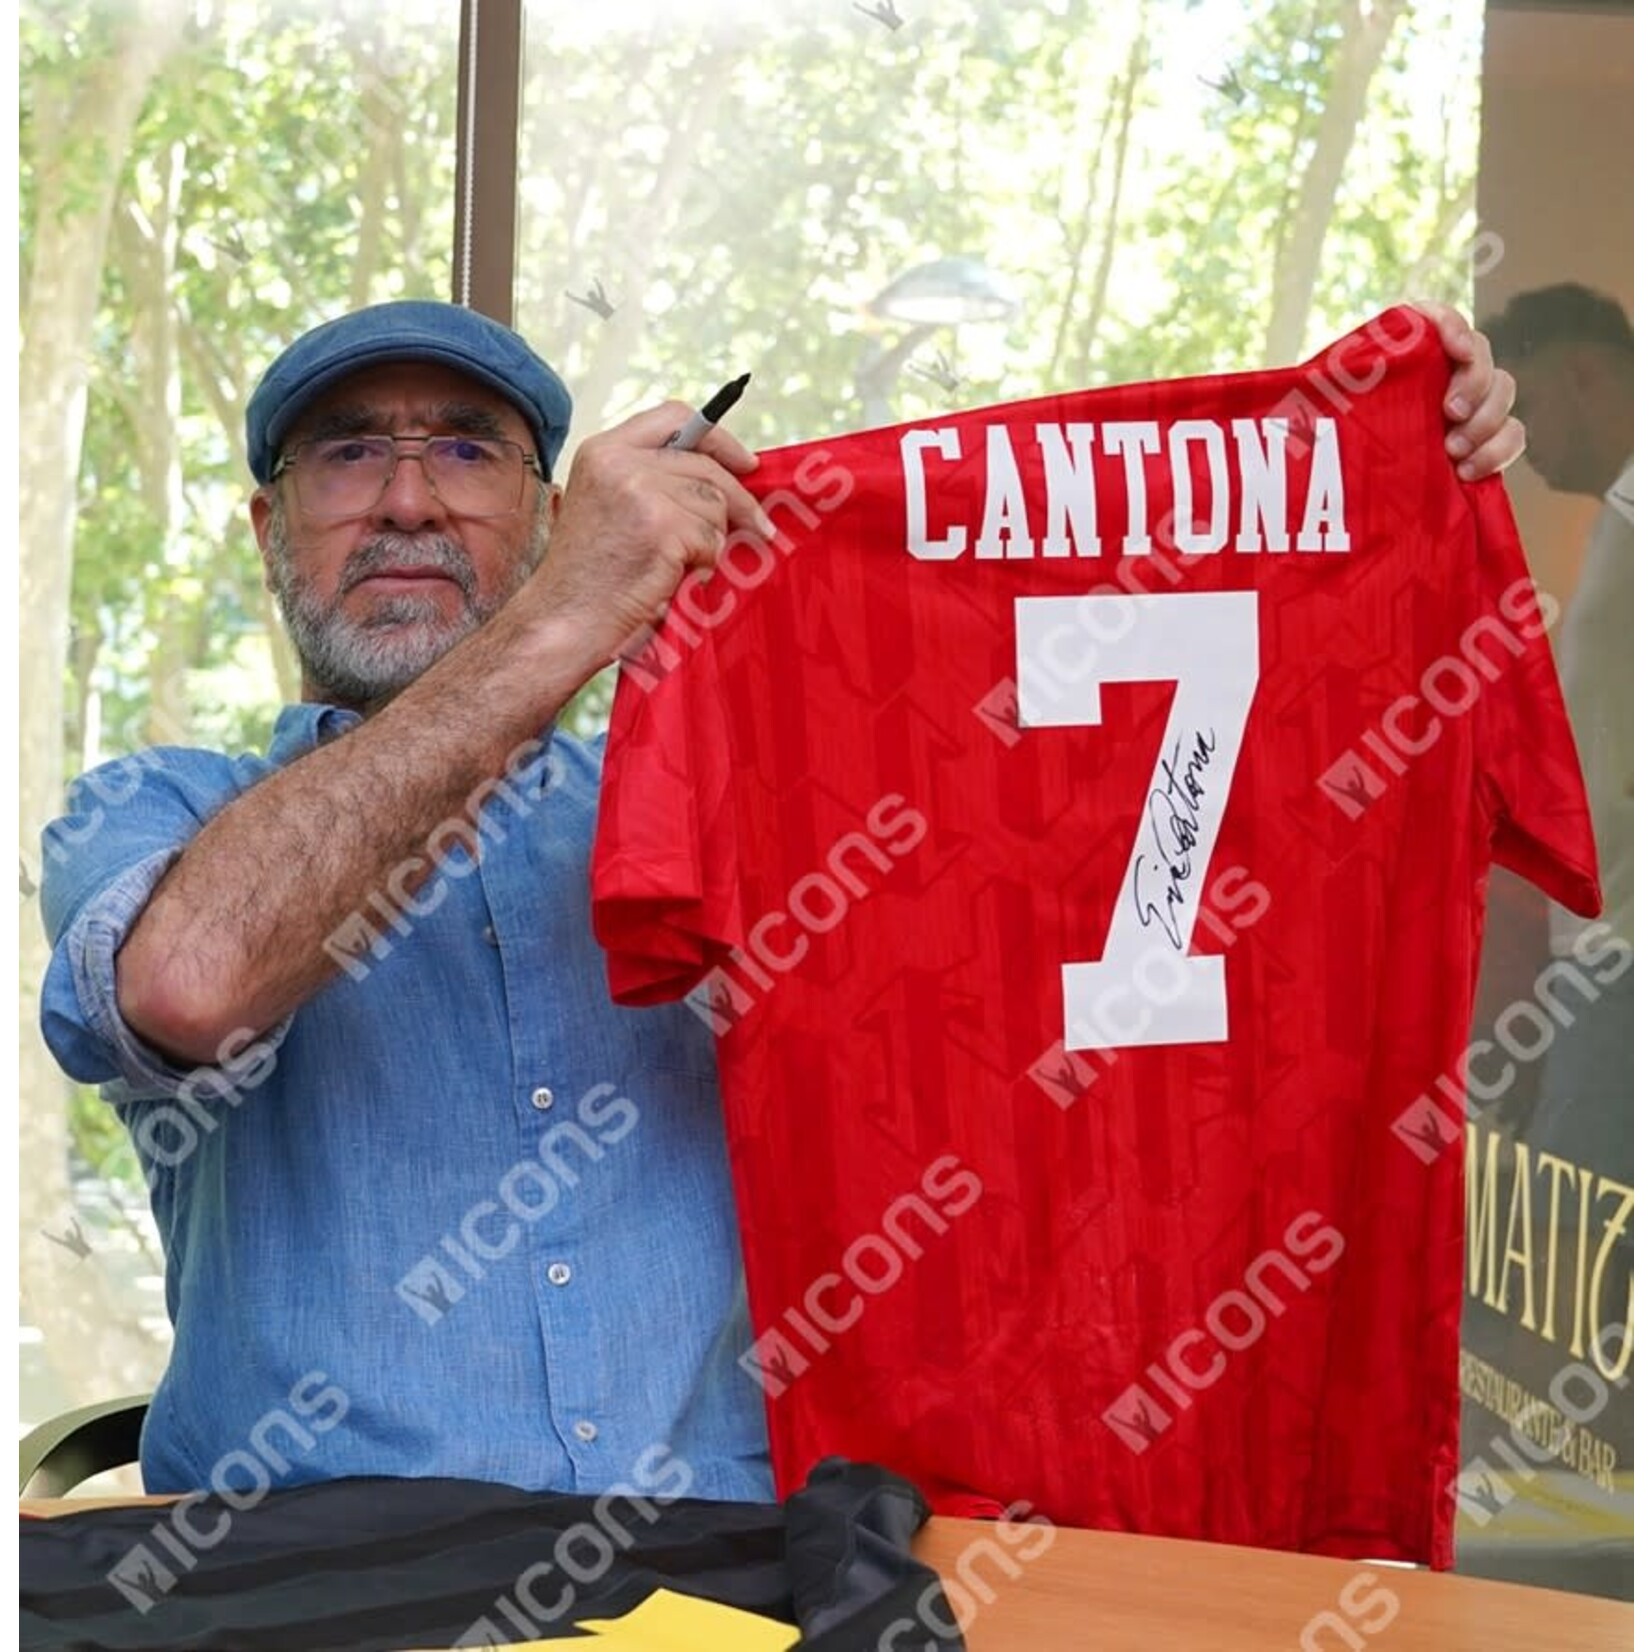 Eric Cantona Authentic Signed Manchester United 1992-94 Home Jersey